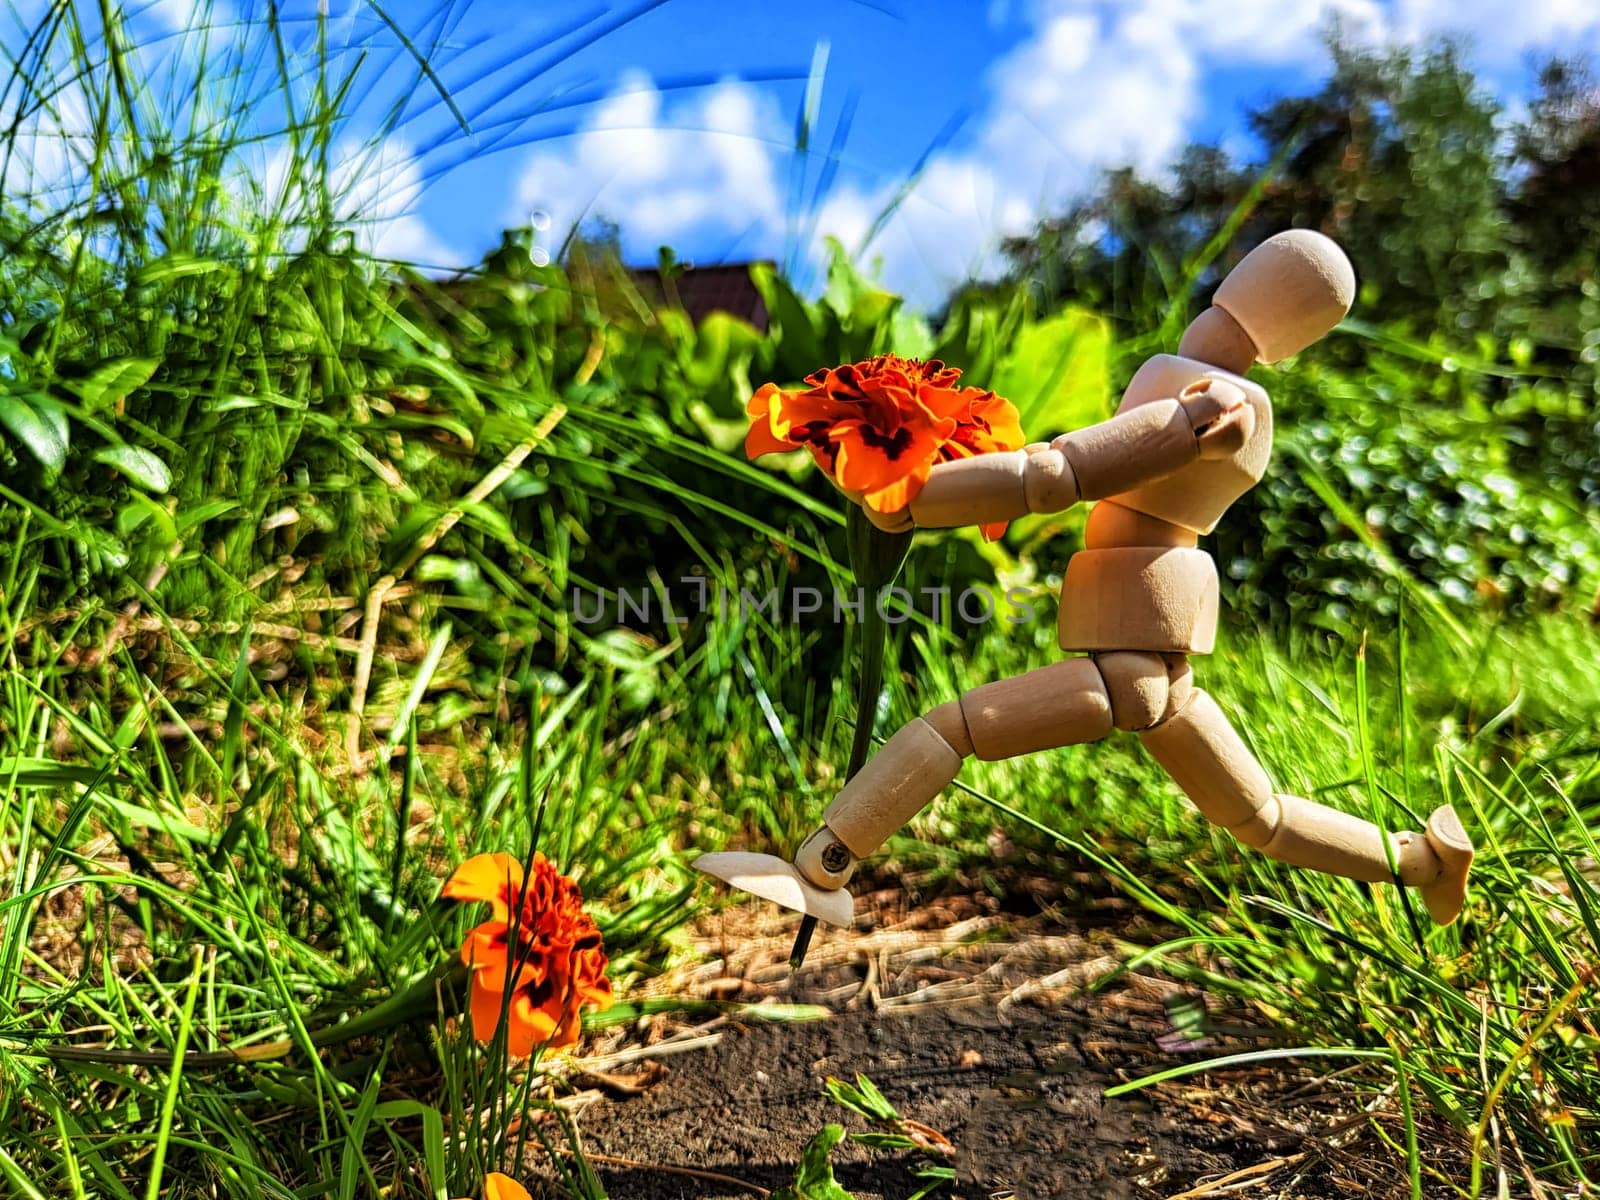 Wooden toy man with flowers against background grass in nature. Concept of holiday, gift bouquet, Valentine's Day, proposal, engagement, declaration of love, Mother's Day. Caring, loving, romantic by keleny